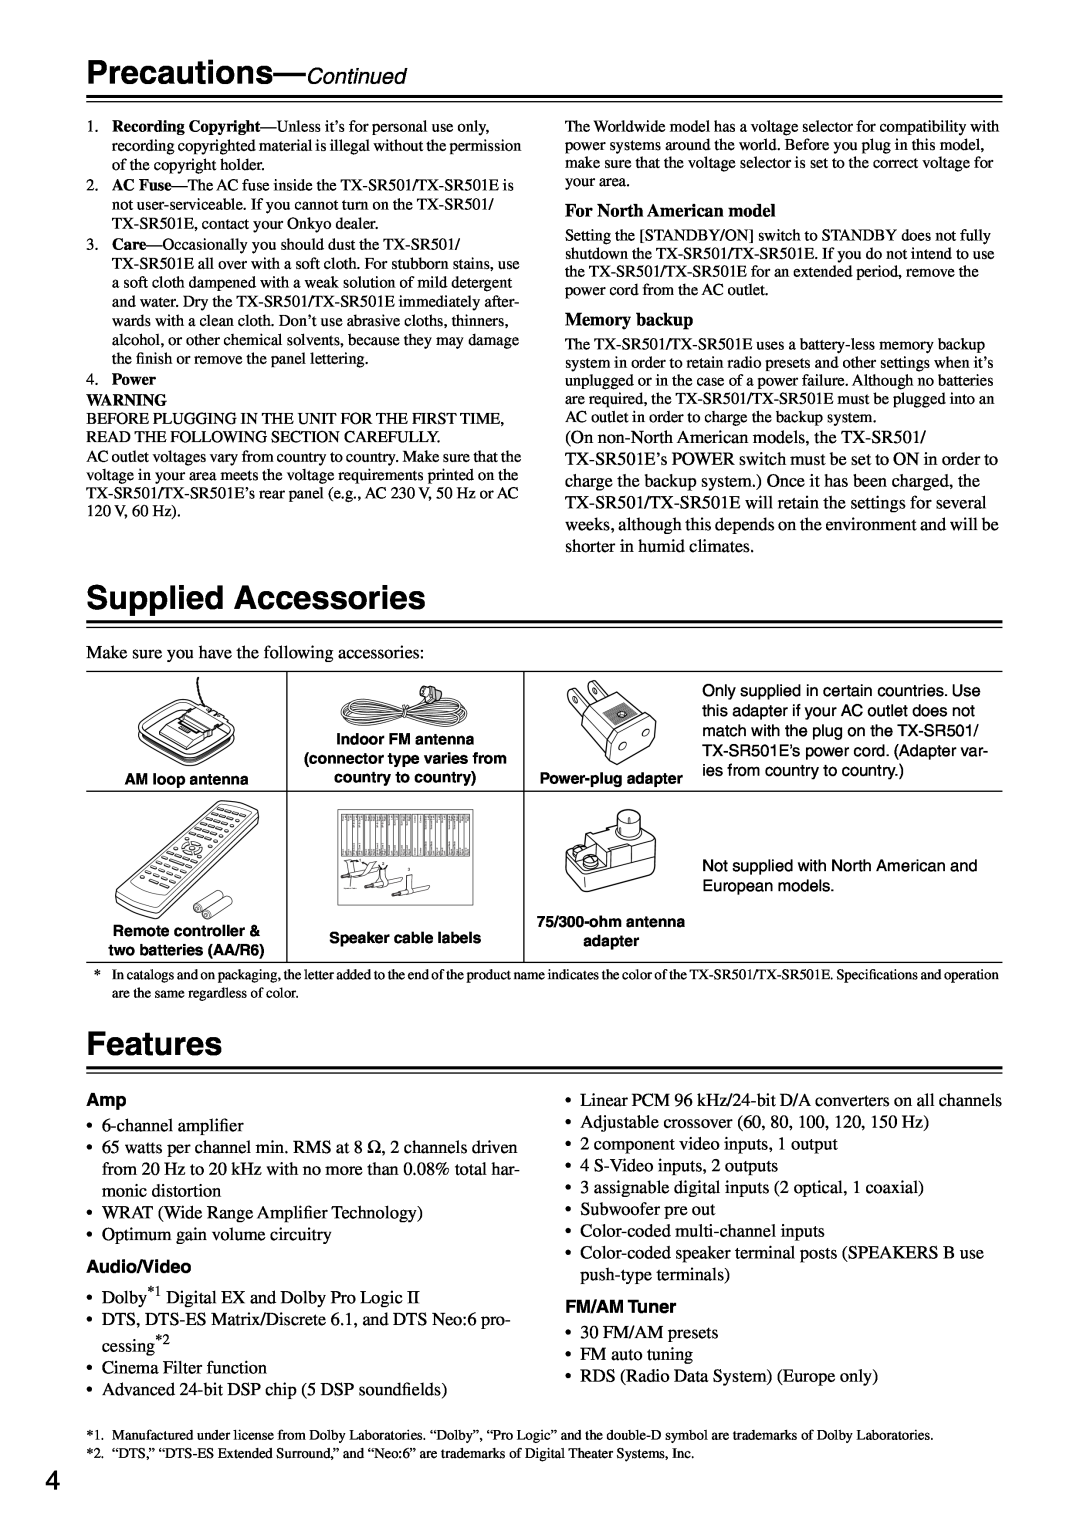 Onkyo TX-SR501E Precautions-Continued, Supplied Accessories, Features, For North American model, Memory backup 